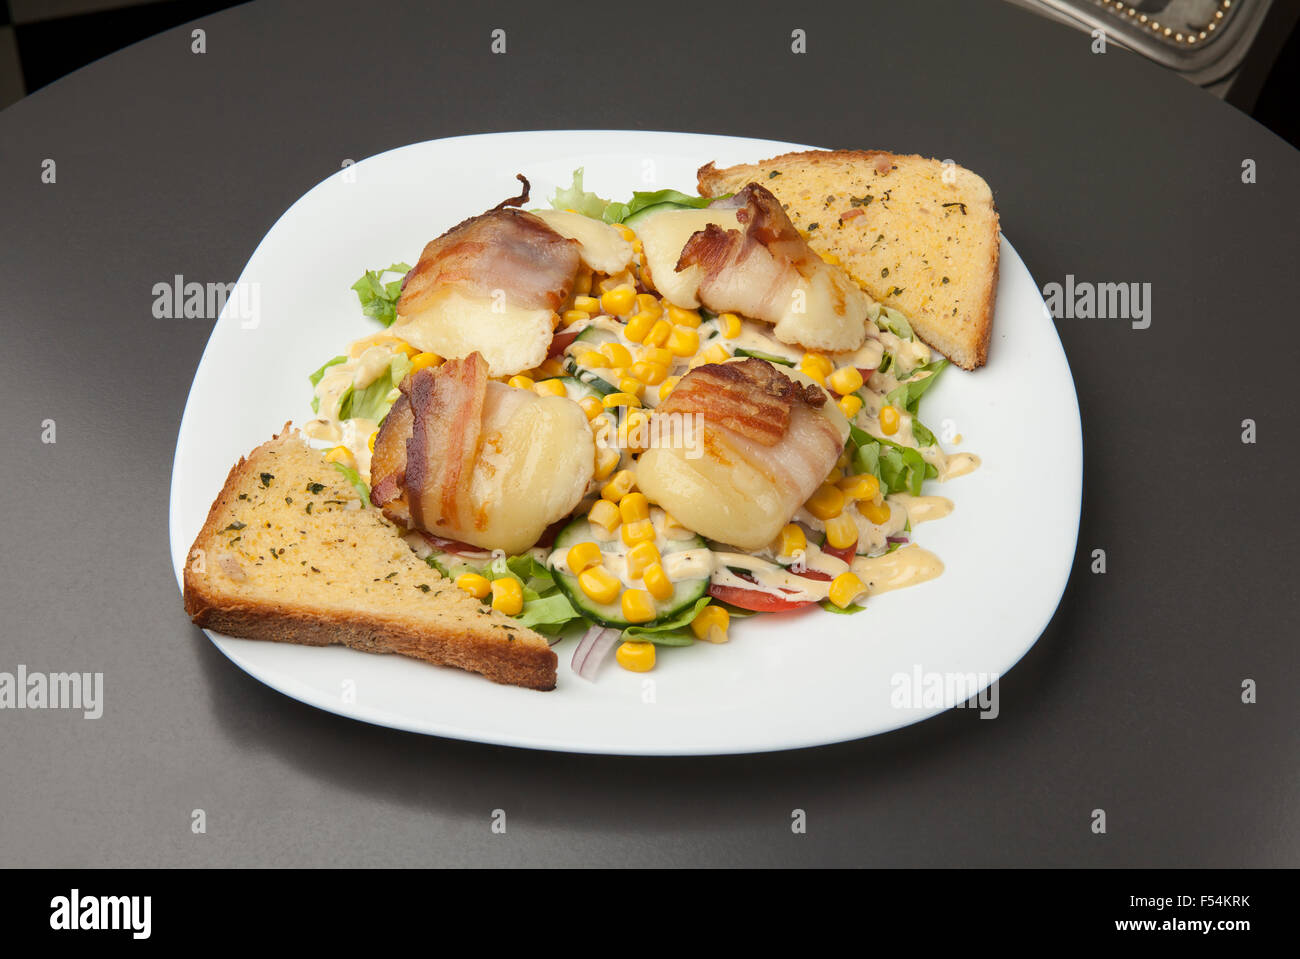 grilled bacon with a side dish of vegetables and cheese Stock Photo